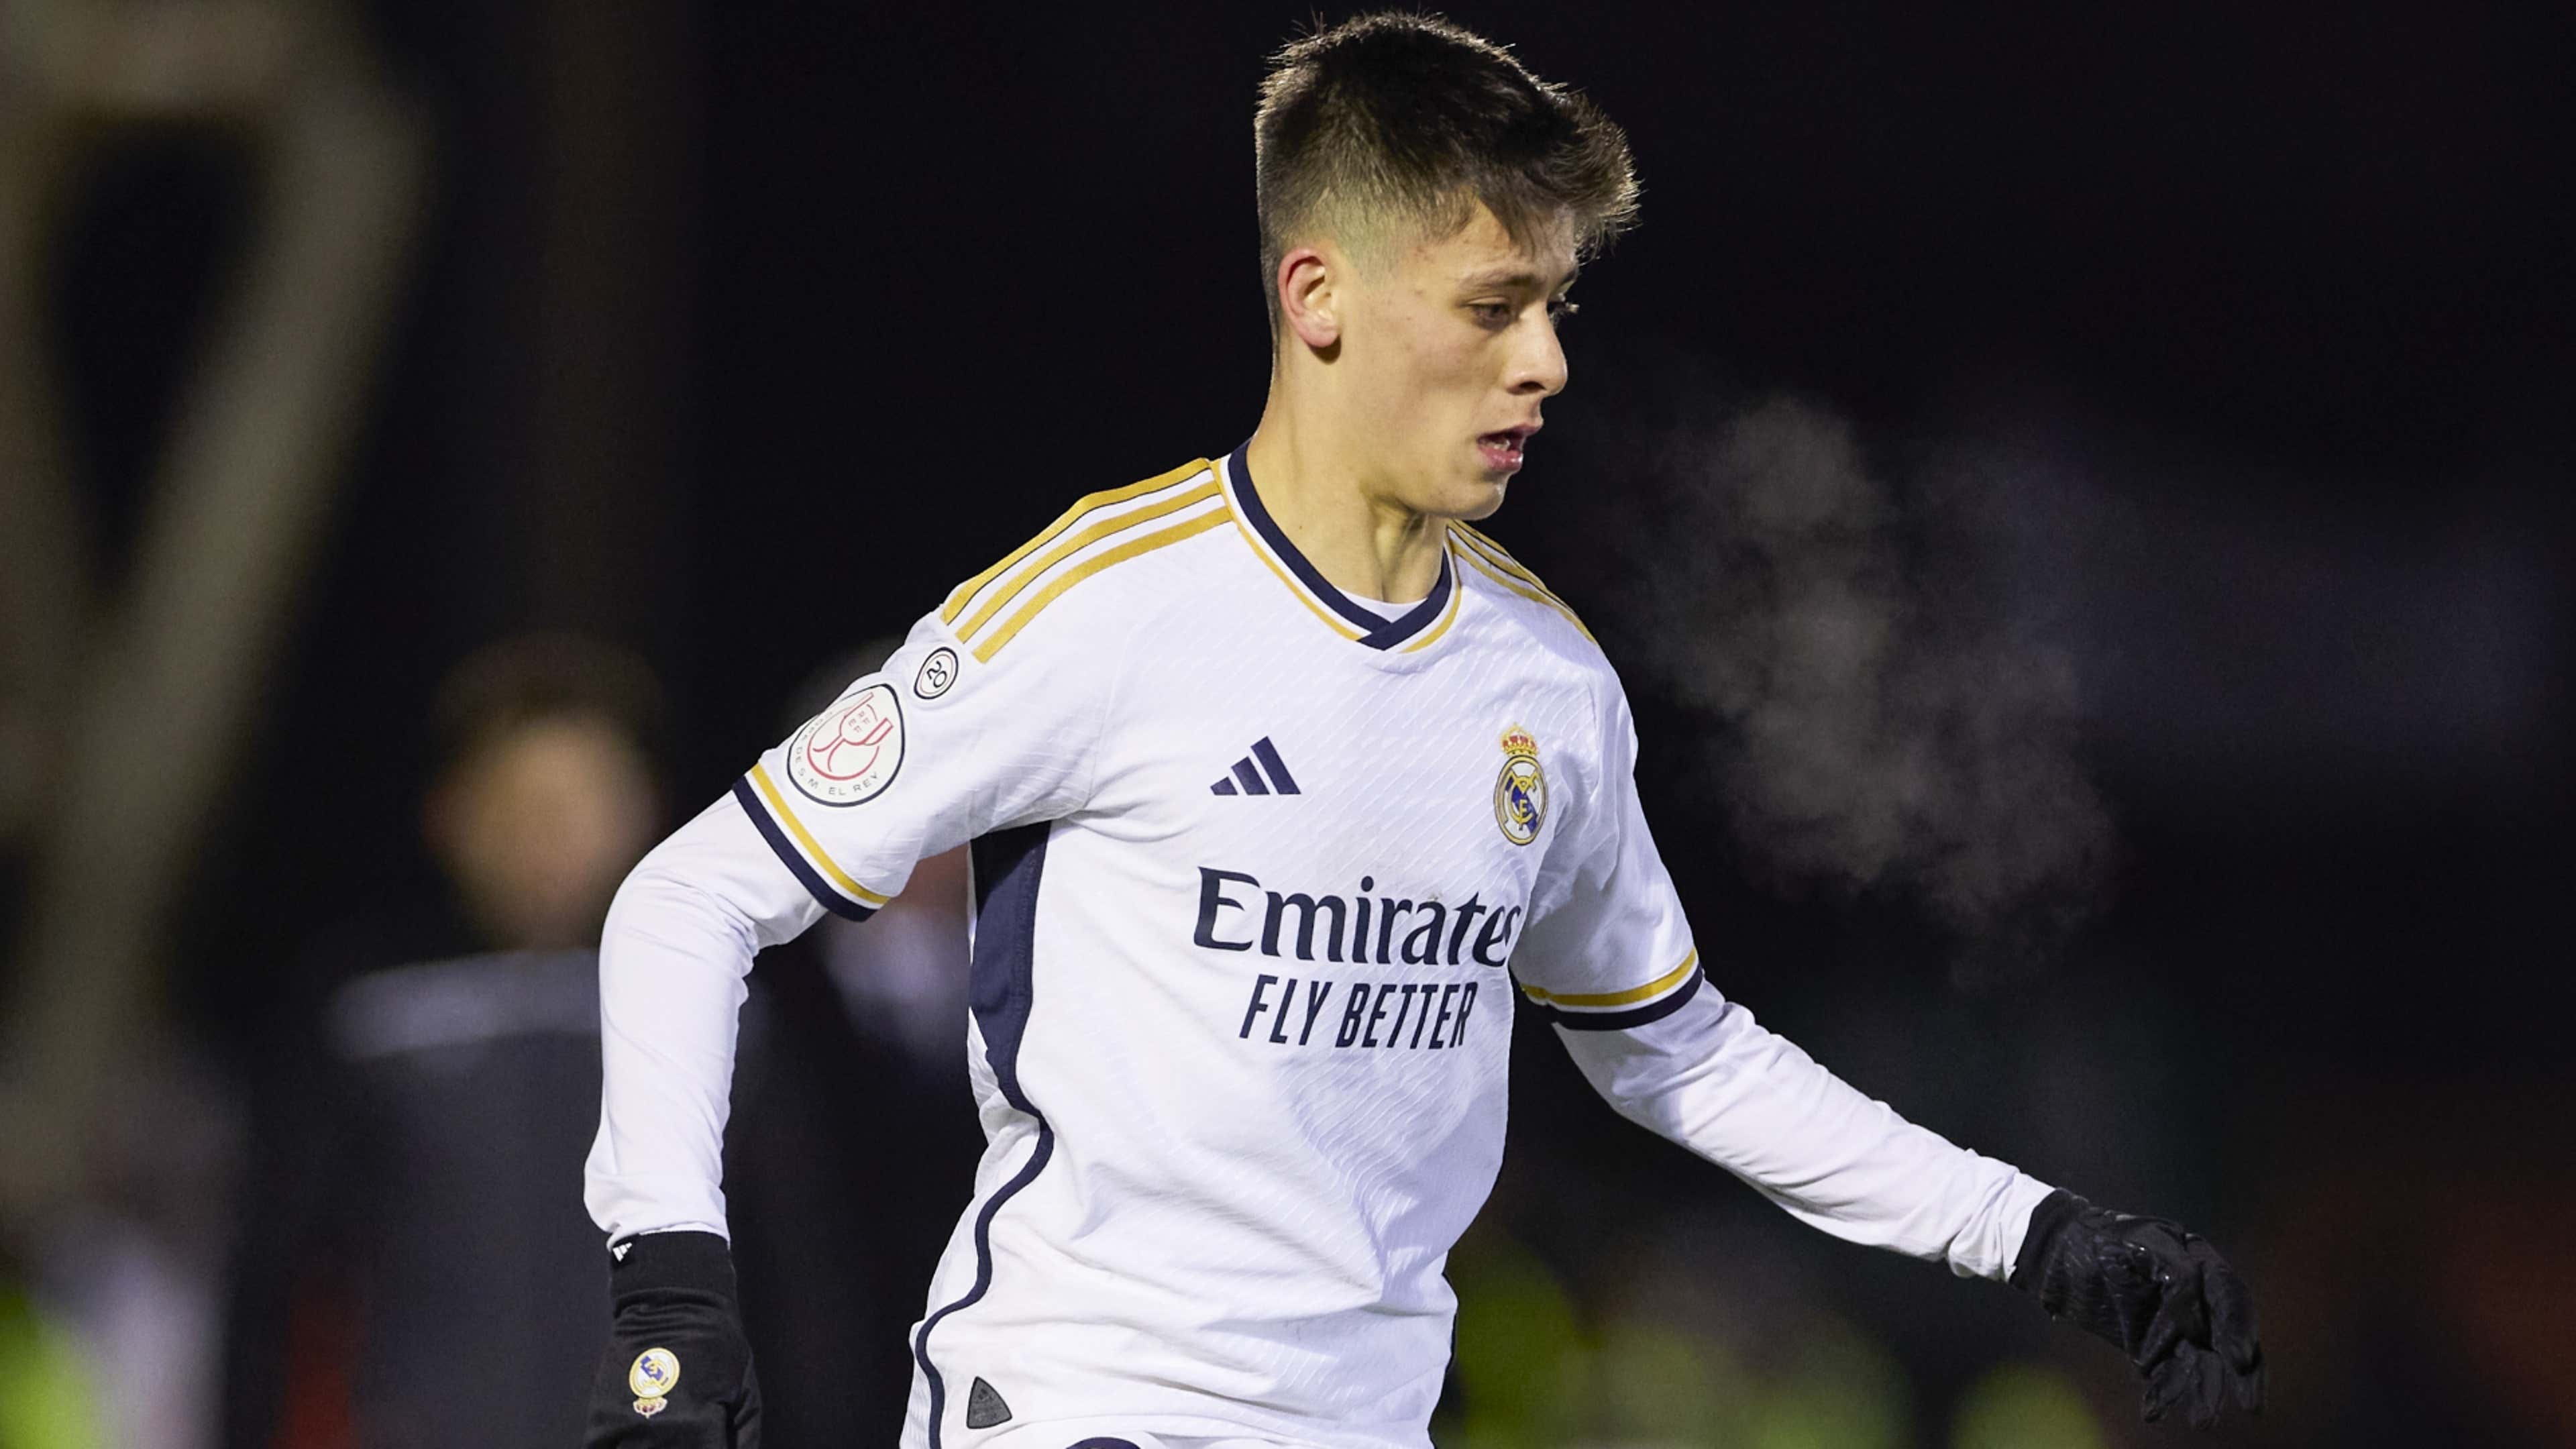 A diamond' - Real Madrid starlet Arda Guler lauded after making first start  in six months in Copa del Rey win over Arandina | Goal.com US